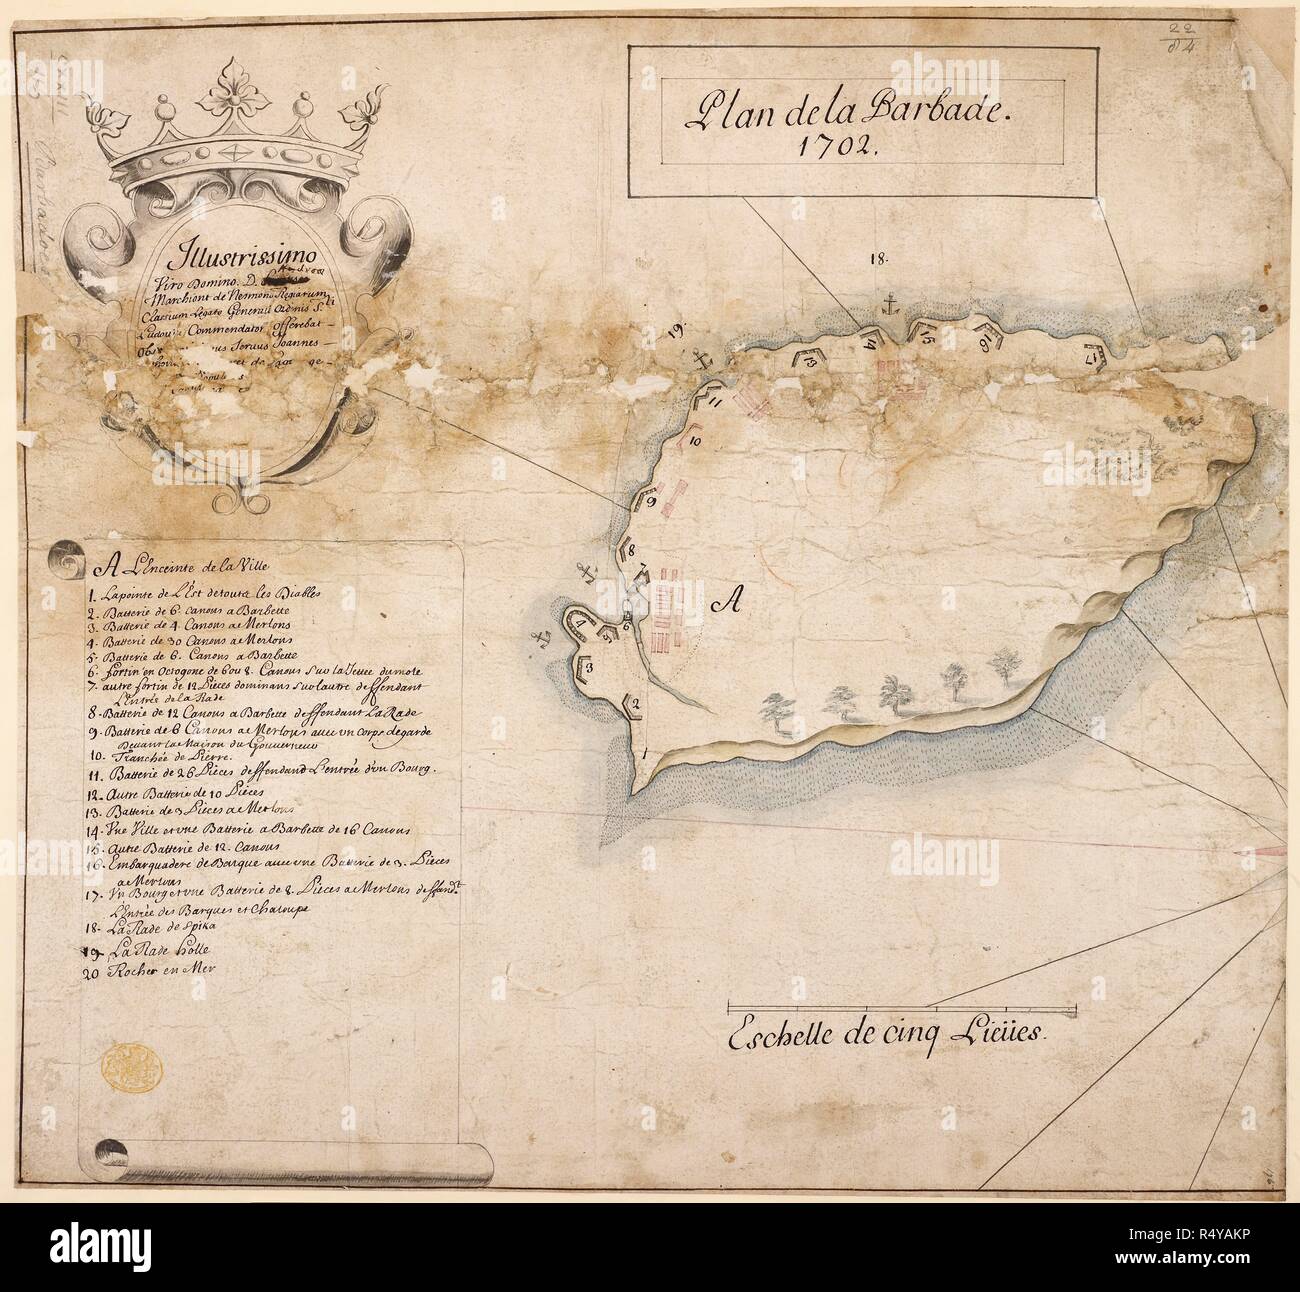 Plan de la Barbade. A simple map of the island of Barbados in 1702. . Plan de la Barbade, 1702. France. published in 1702 'Plan de la Barbade, 1702;' dedicated to AndreÌ, Marquis de Nesmond, Admiral, by Jean .. thov . . . Platevet de Paor; drawn on a scale of one inch to a league. Source: Maps K.Top.123.116. Language: French. Stock Photo